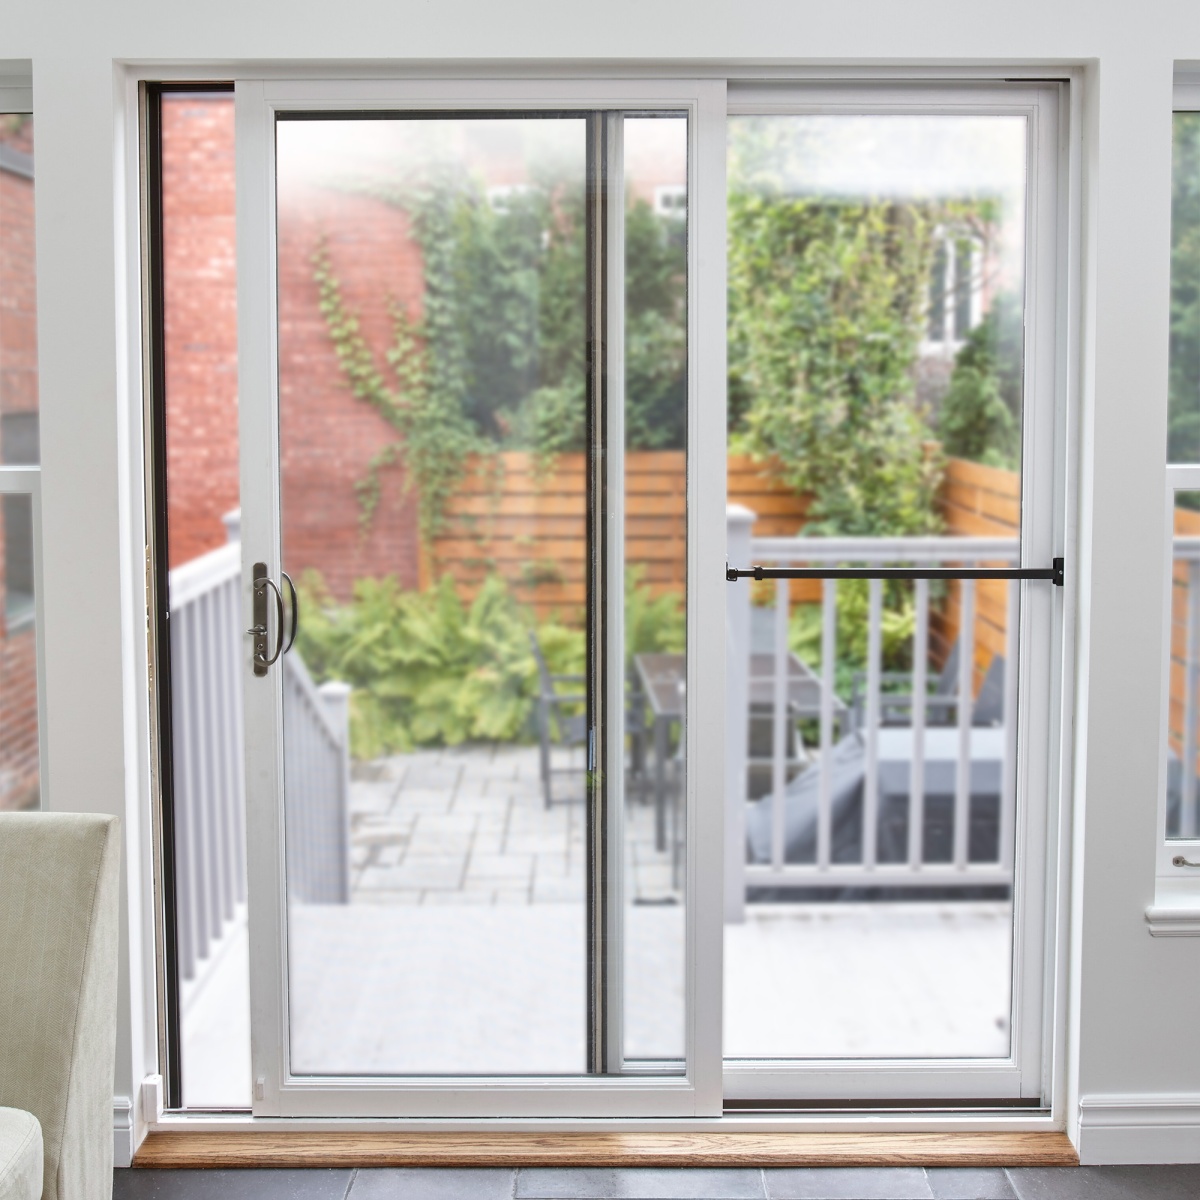 How to Secure Your Sliding Glass Doors